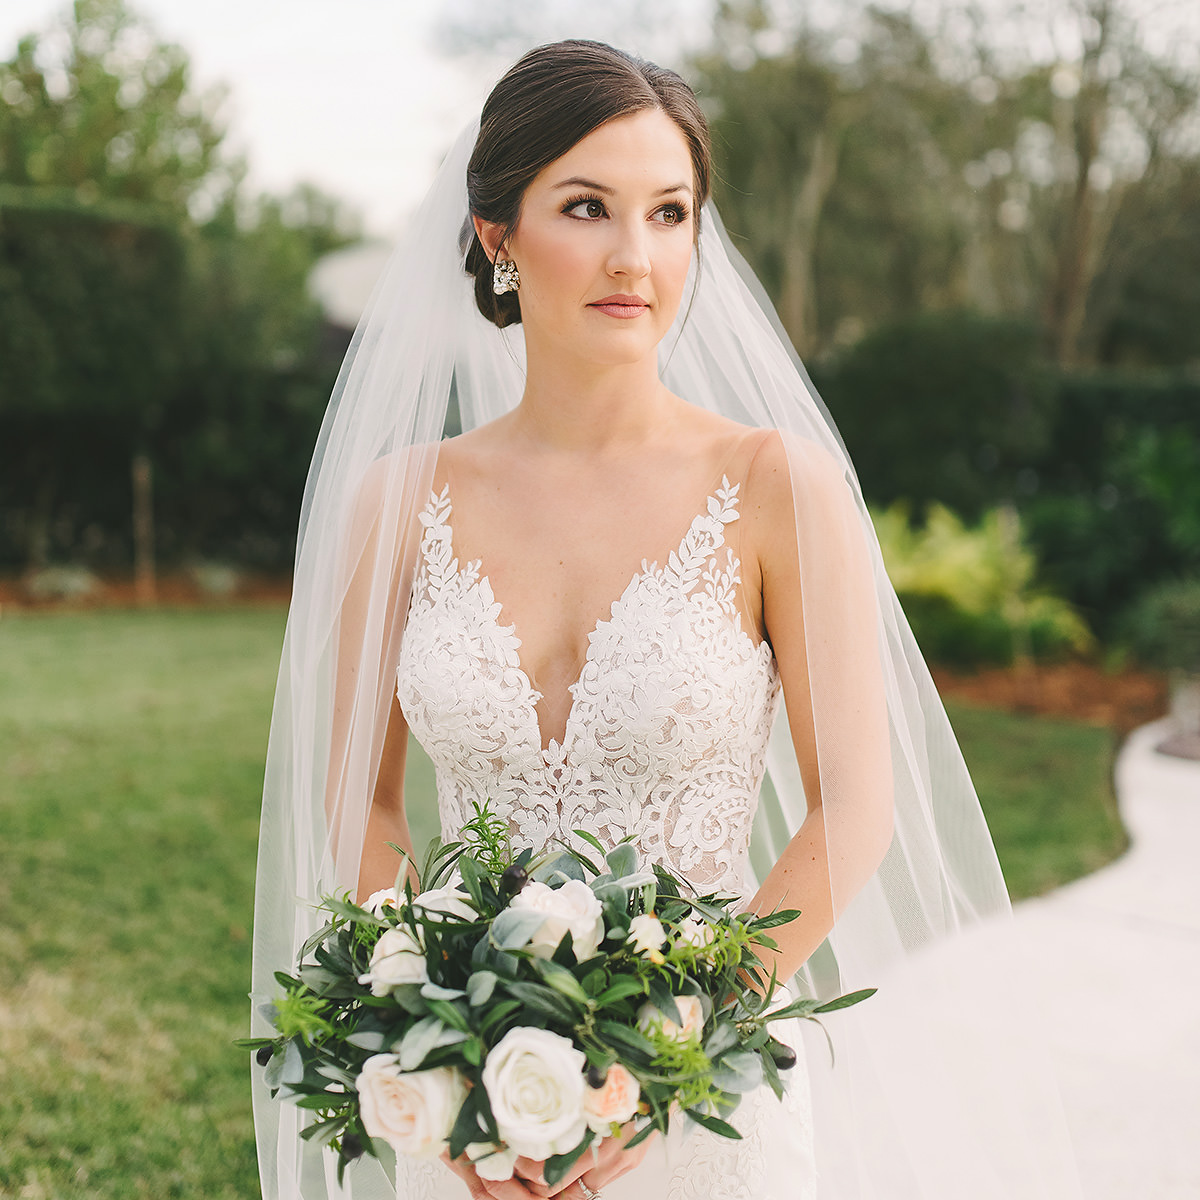 Pops Fountain Arbor Room New Orleans City Park Wedding | Candace & Tyler